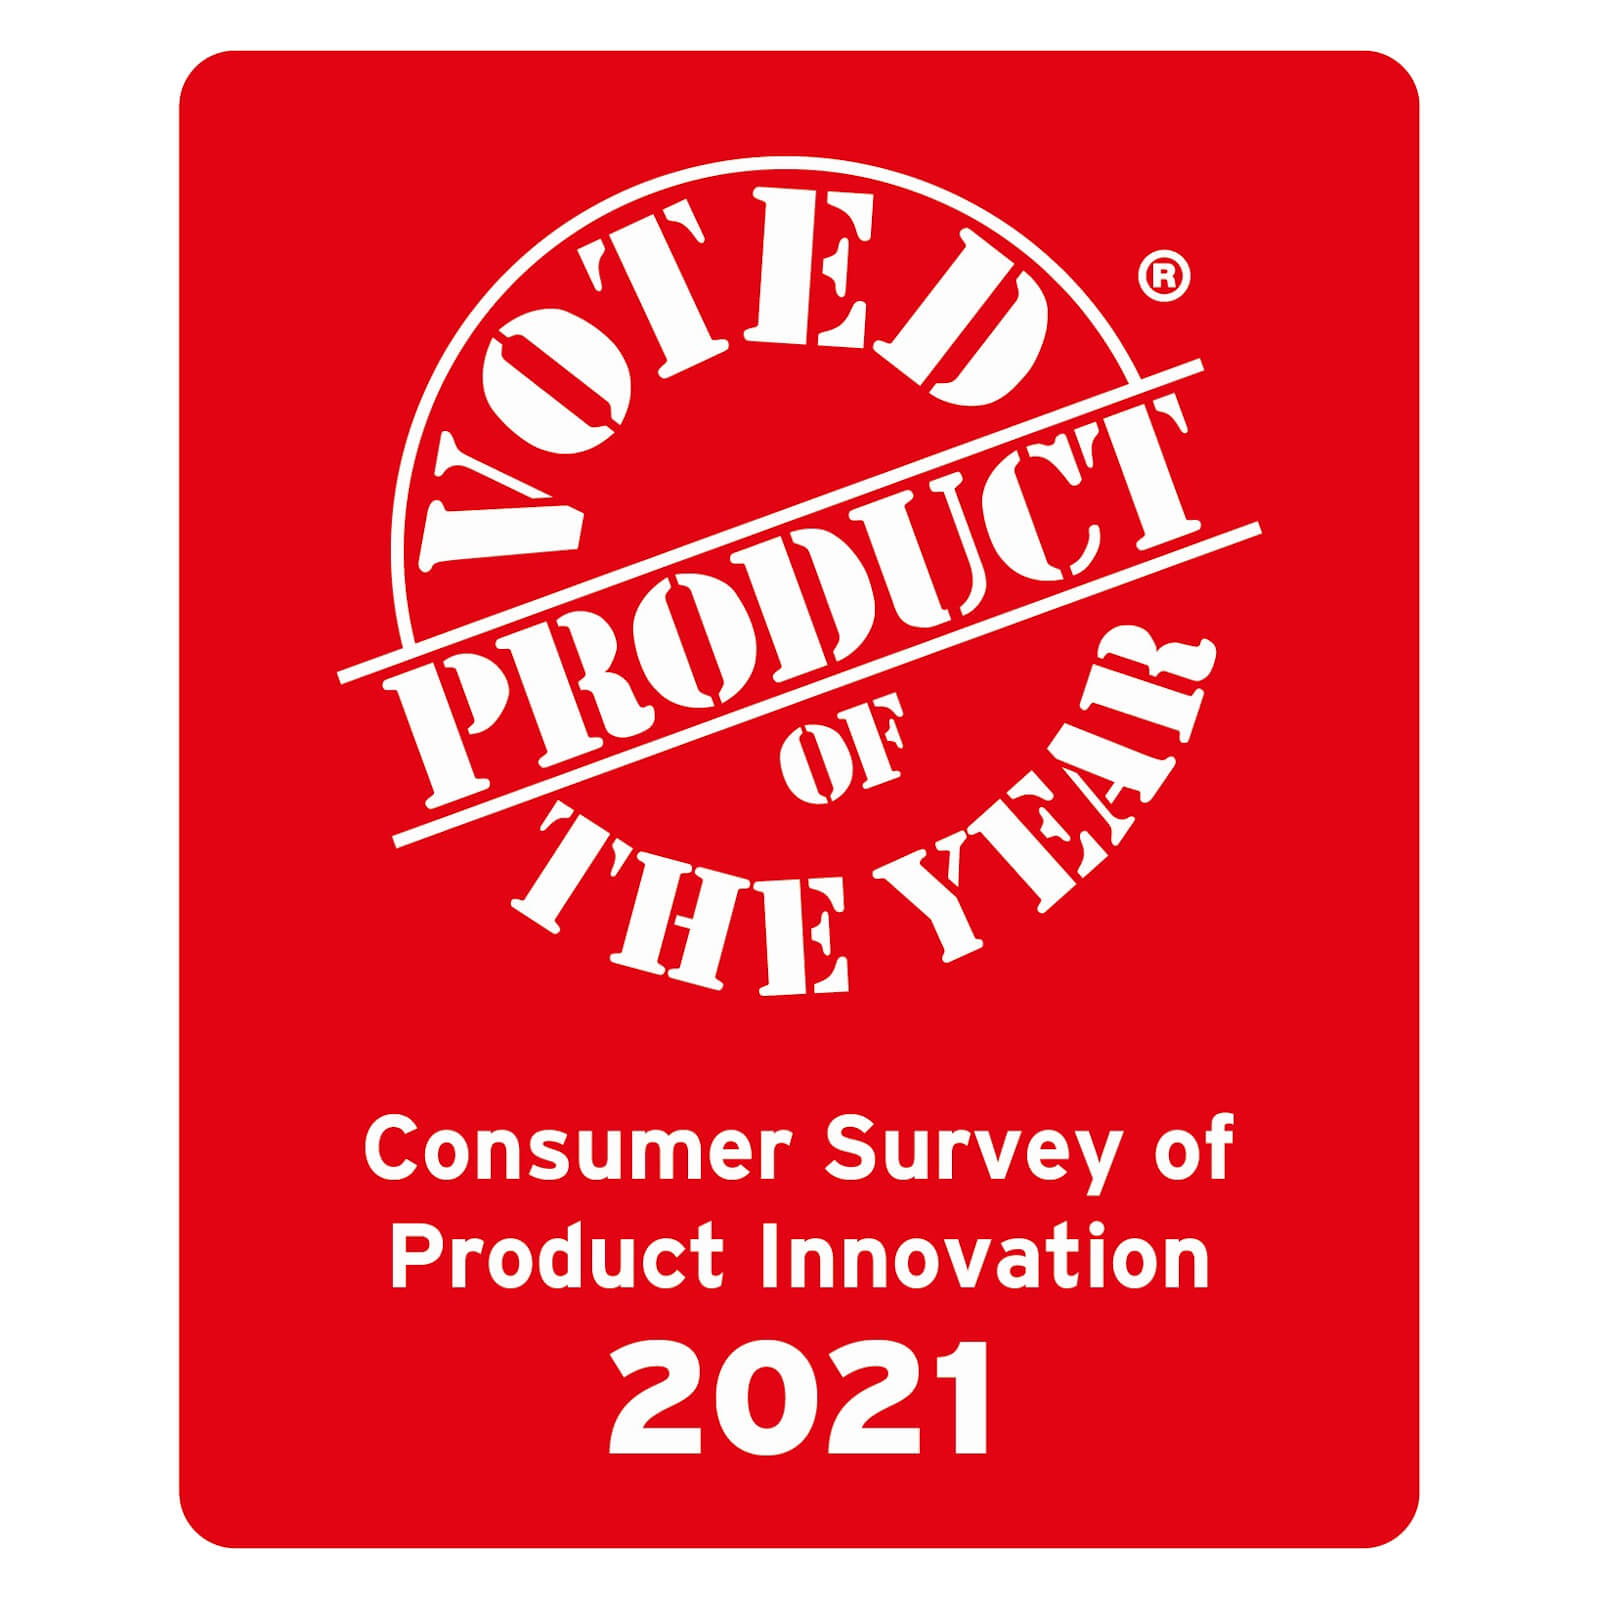 VOTED PRODUCT OF THE YEAR
                                  Consumer Survey of Product Innovation
                                  2021 LOGO